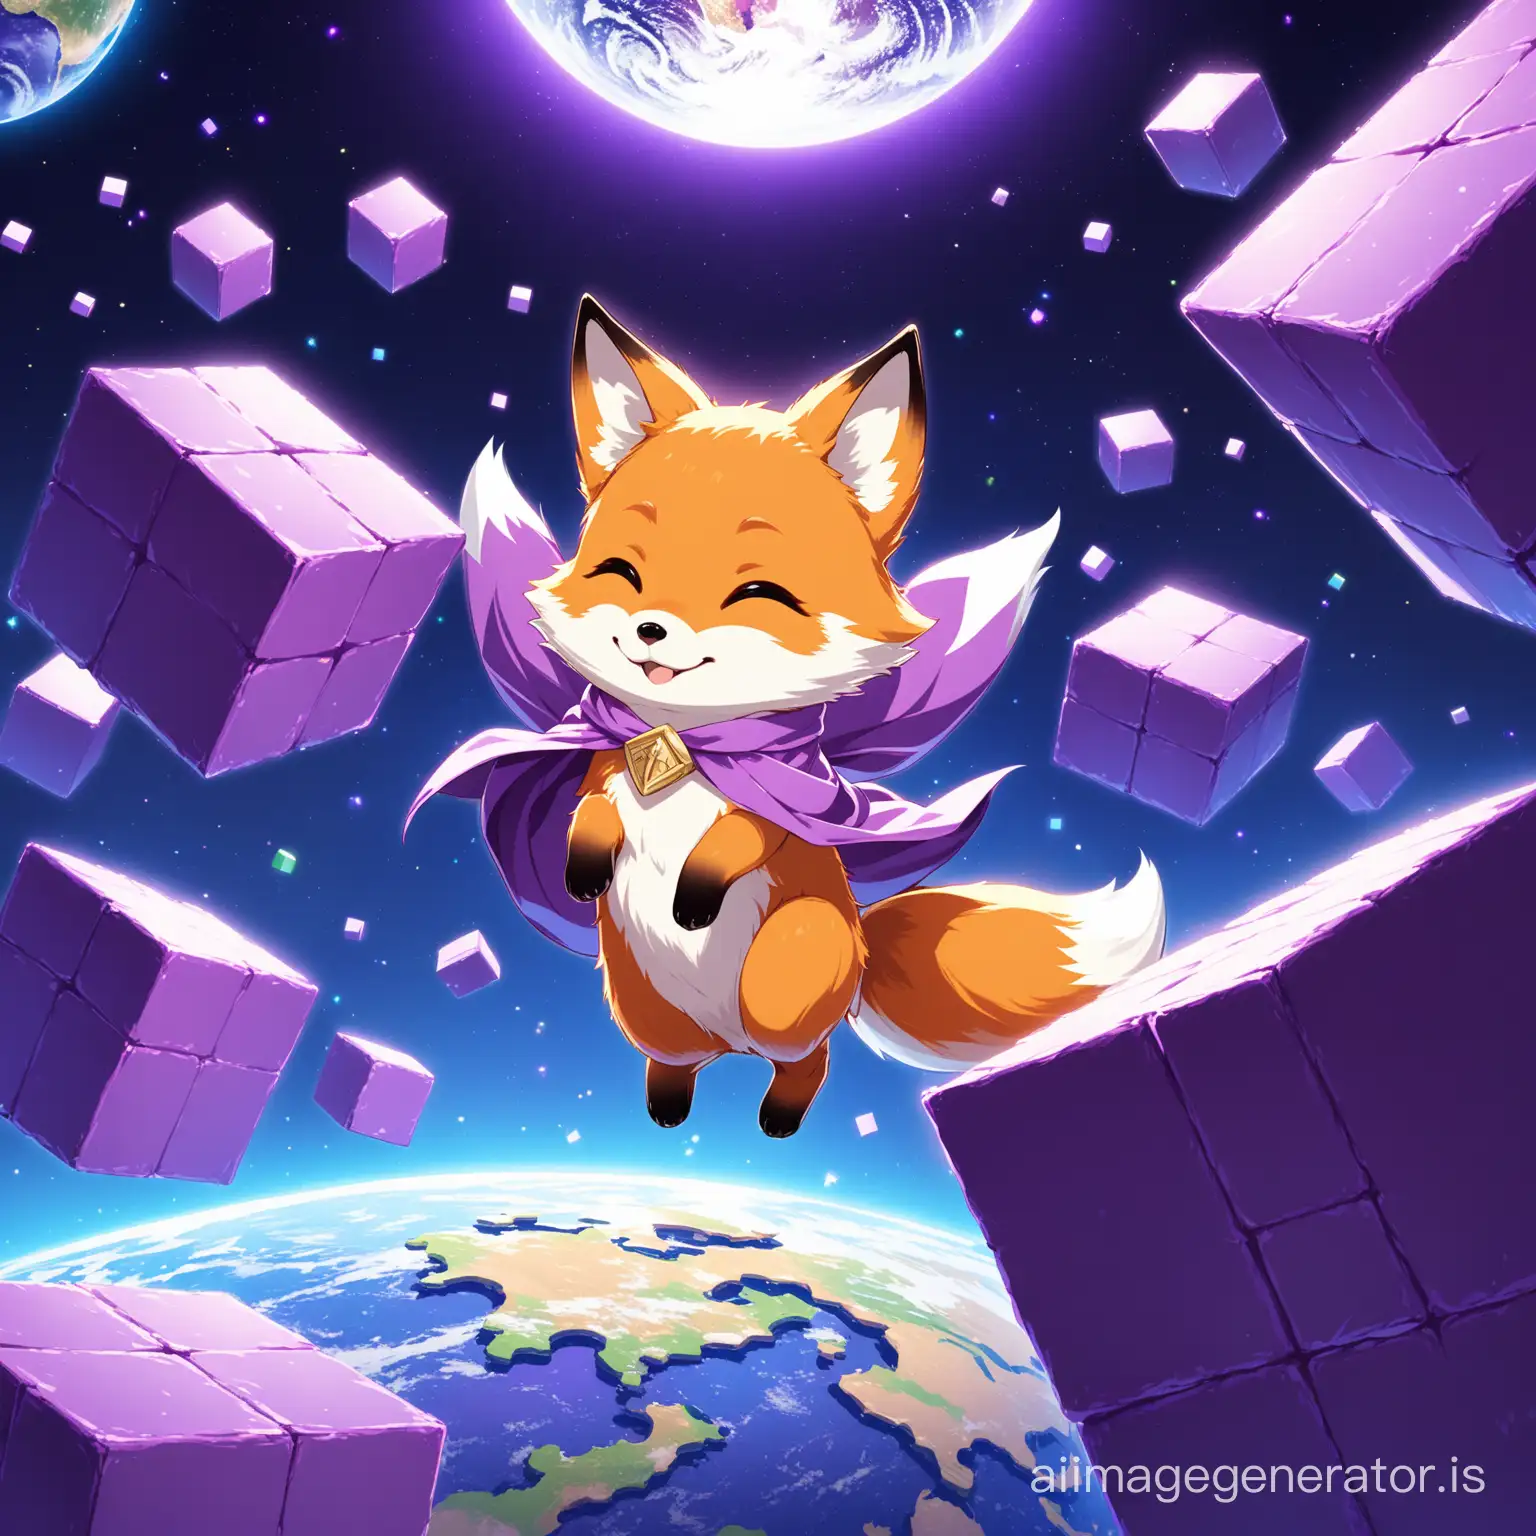 A little cute fox with purple cloth  flying on the  purple block earth with super detail and High Quality
big and Purple and floating blocks are seen everywhere
Details are evident beautifully and with great precision
